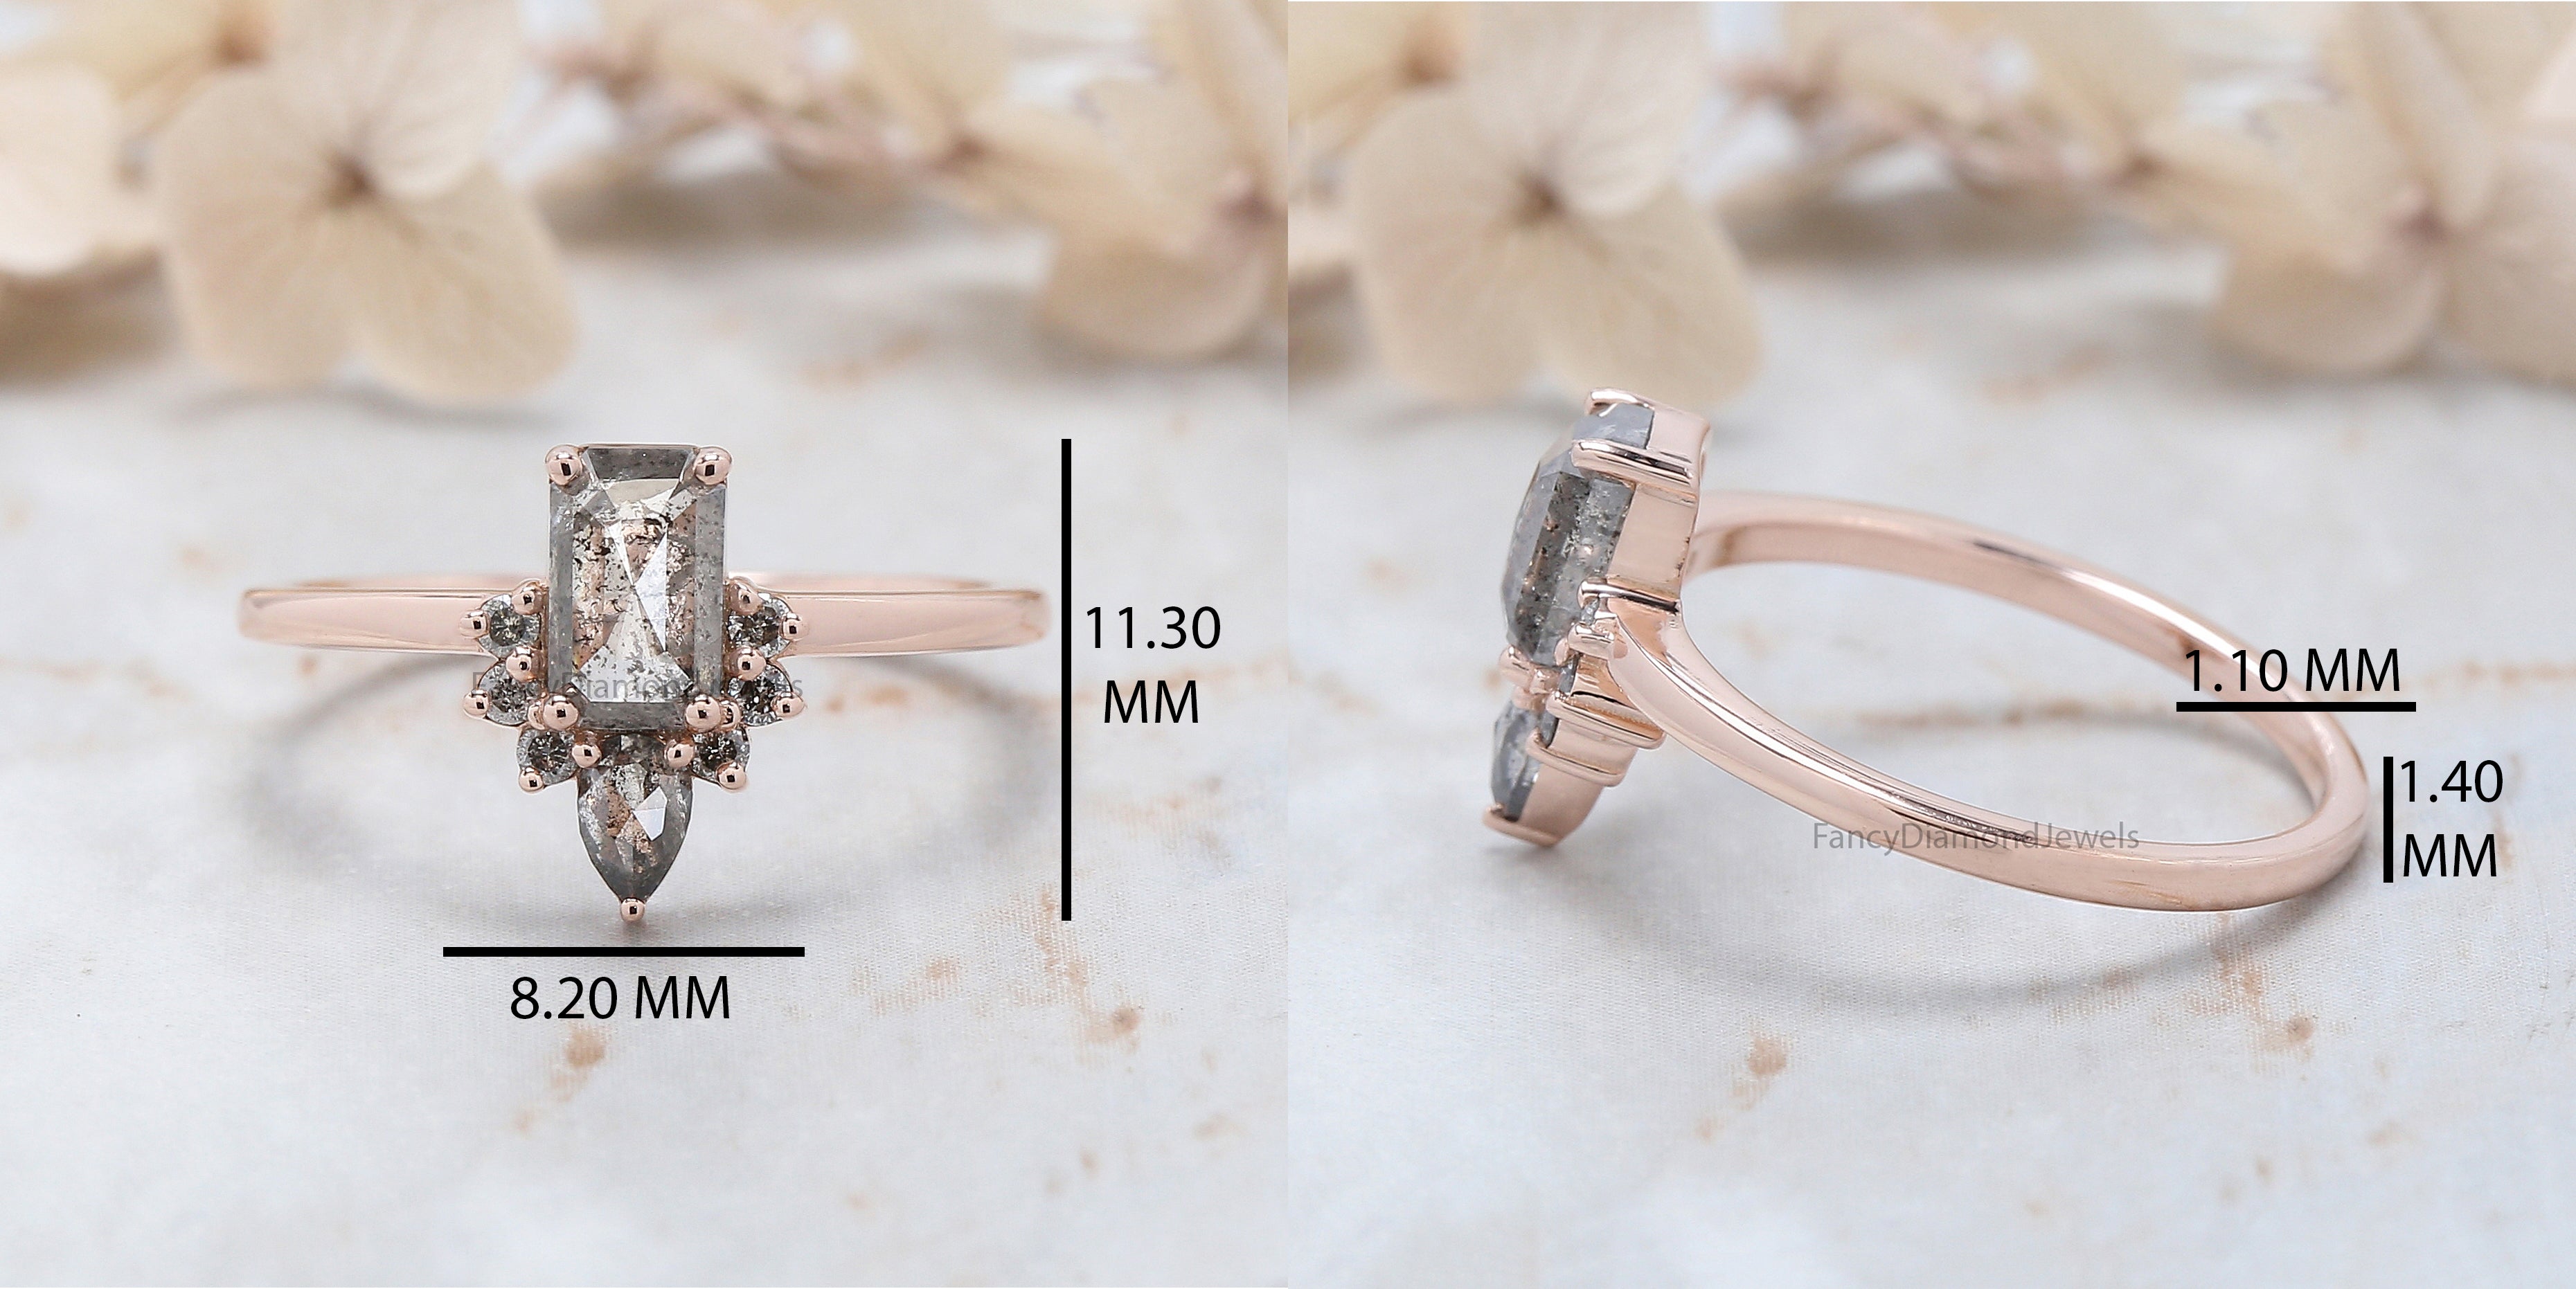 Emerald Salt And Pepper Diamond Ring 0.87 Ct 6.60 MM Emerald Diamond Ring 14K Solid Rose Gold Silver Engagement Ring Gift For Her QN9871